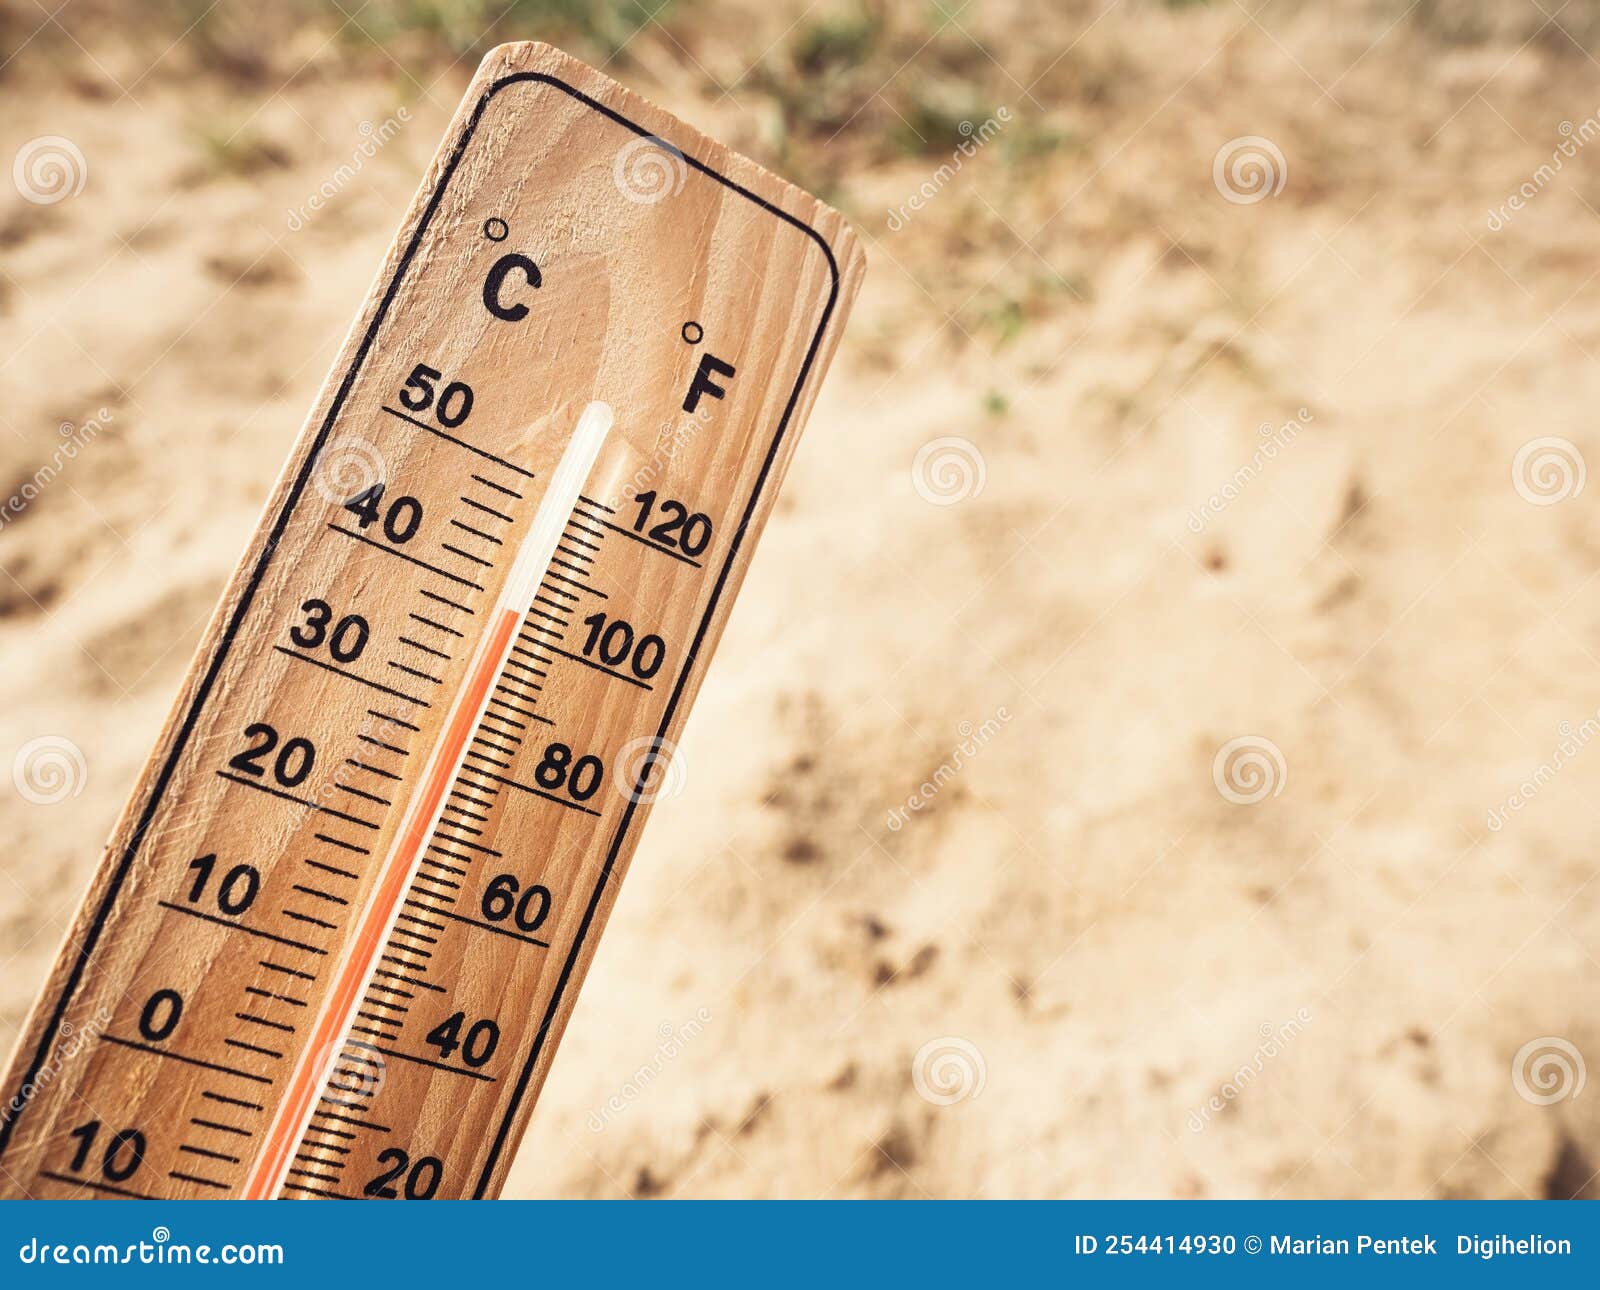 https://thumbs.dreamstime.com/z/wooden-thermometer-showing-high-temperatures-over-degrees-celsius-sunny-day-background-dry-sandy-ground-concept-heat-wave-254414930.jpg